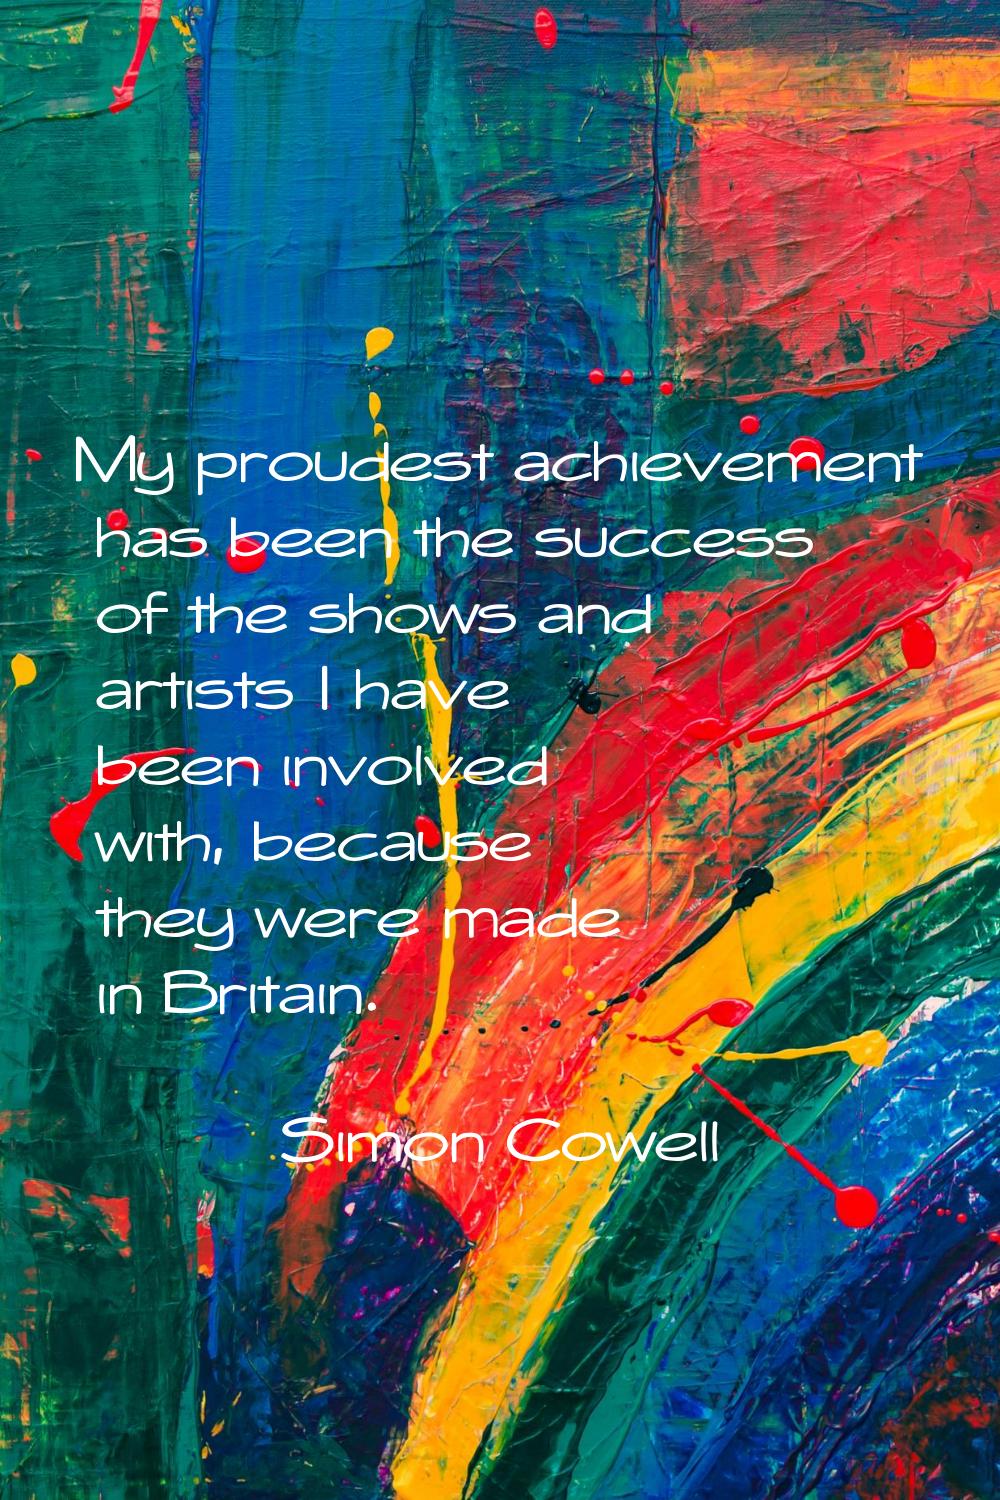 My proudest achievement has been the success of the shows and artists I have been involved with, be